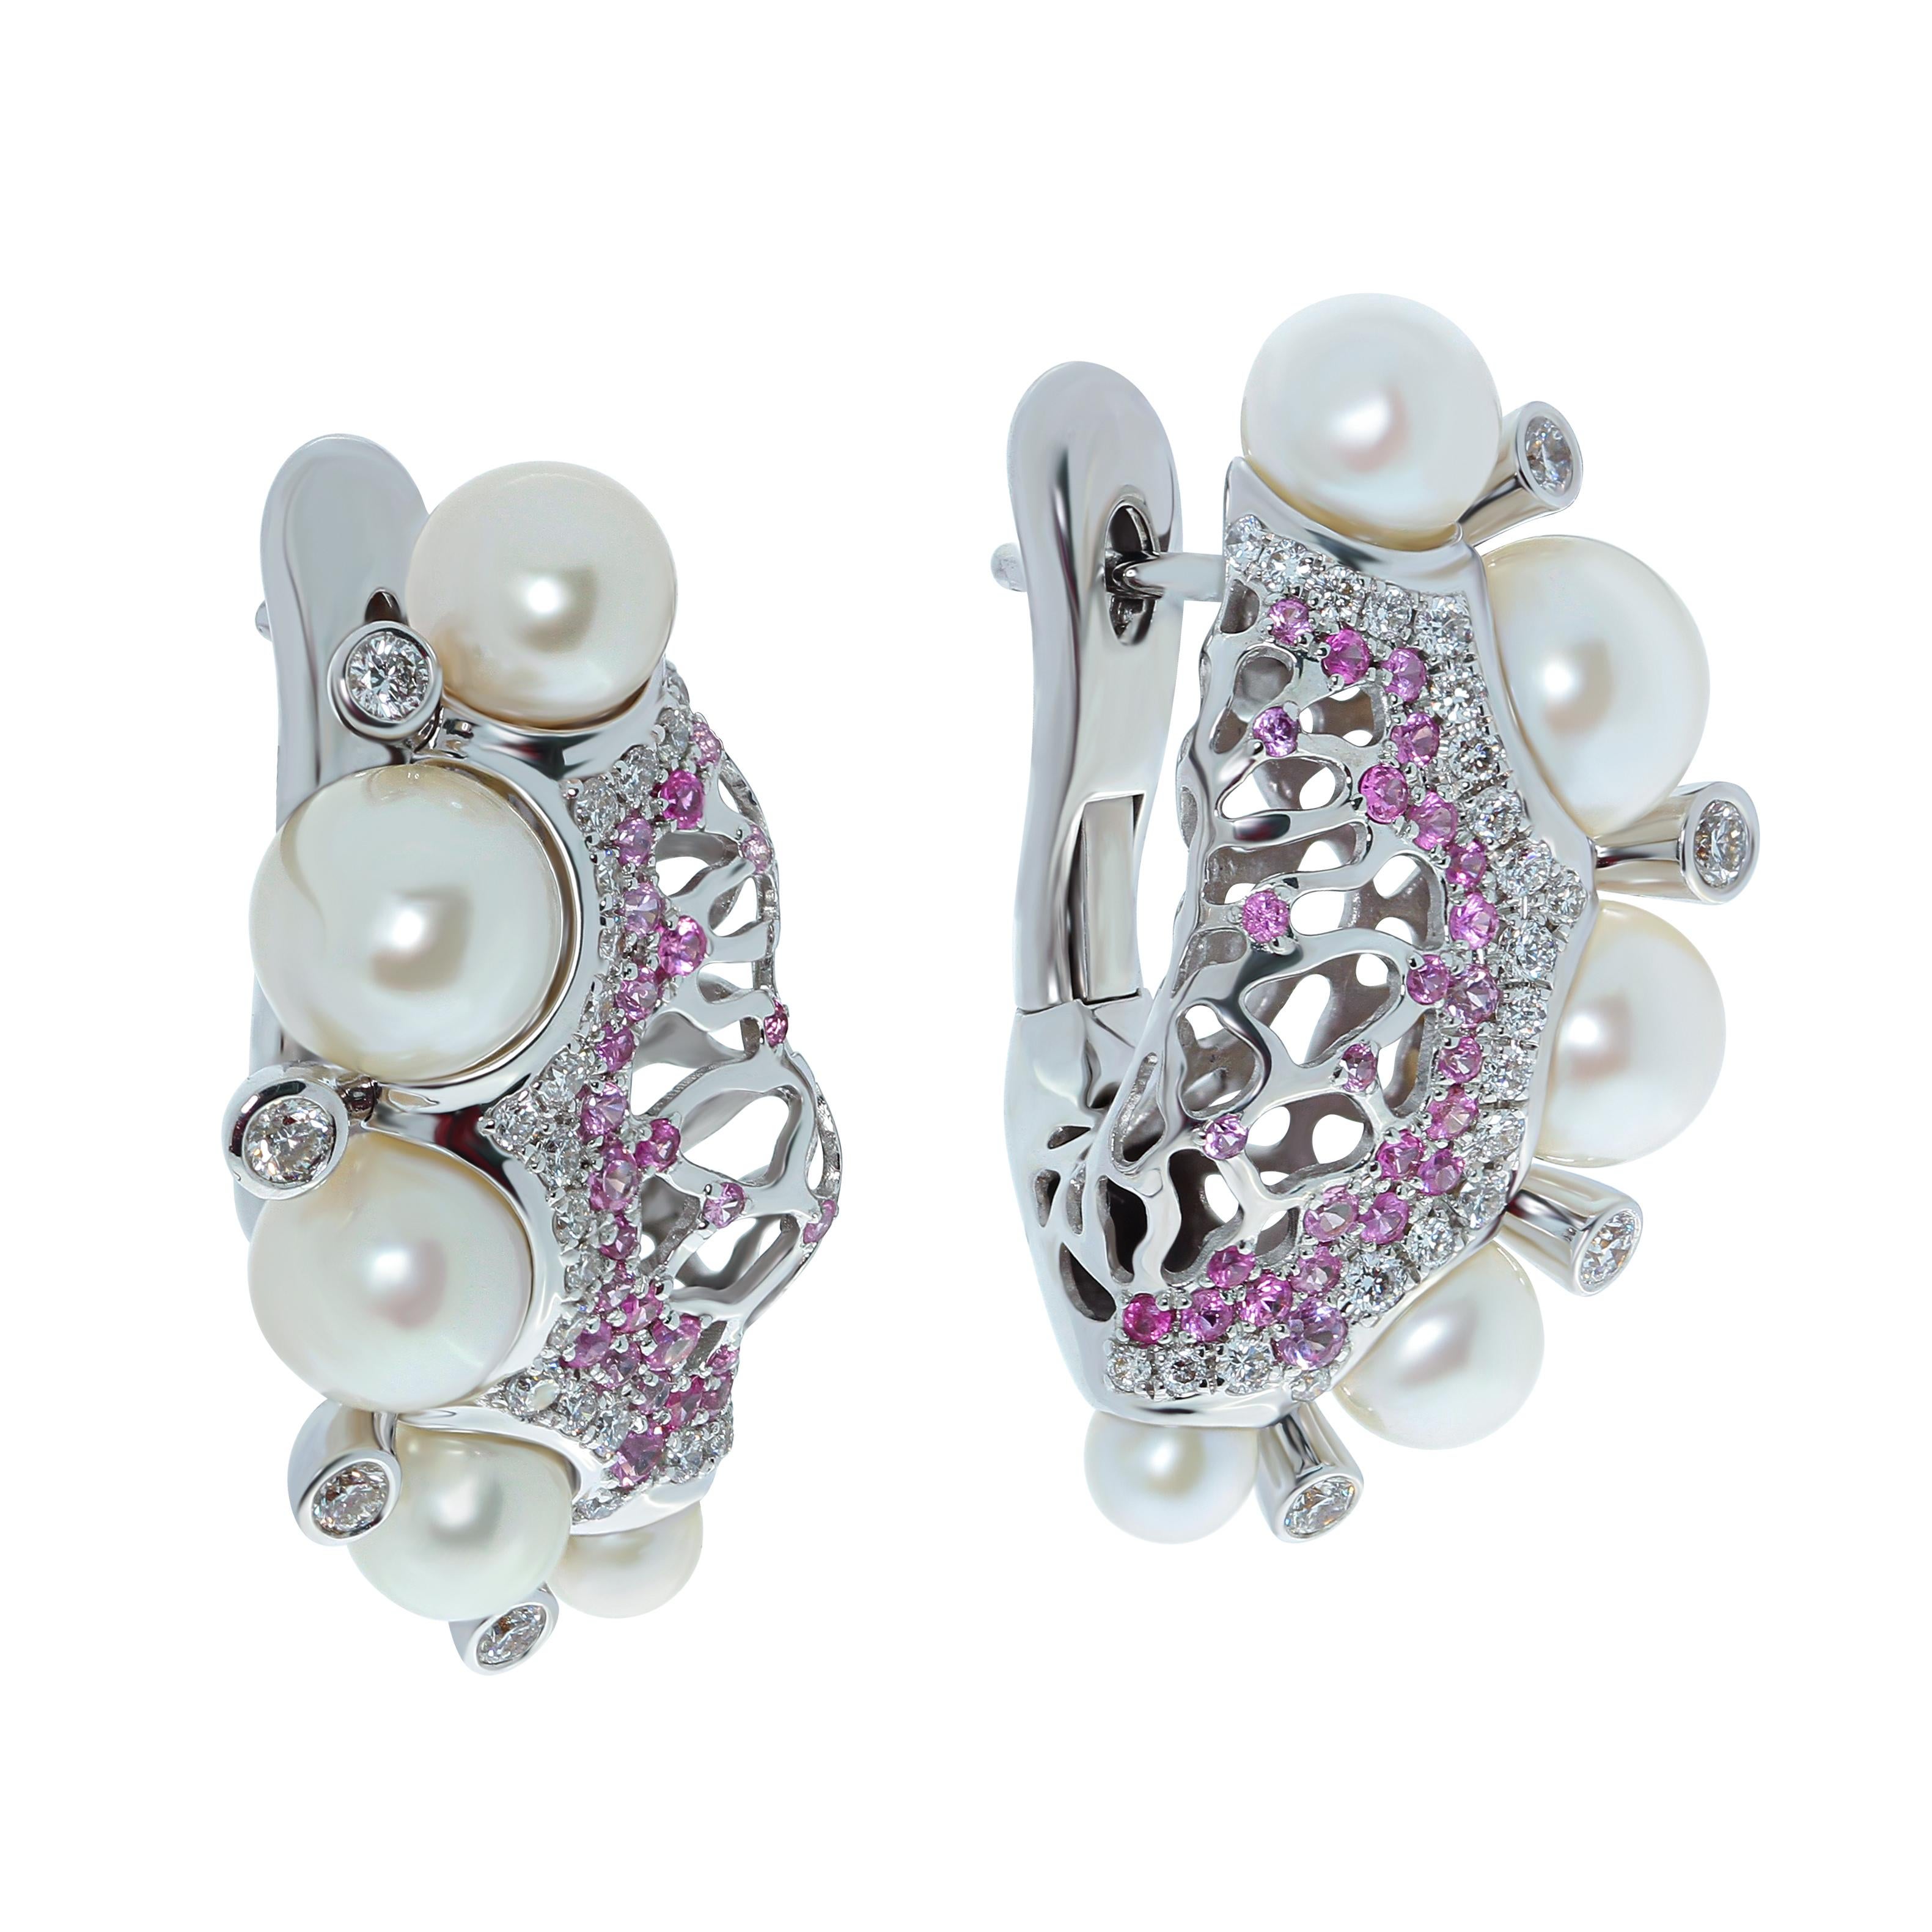 Pearls 10 pieces Diamonds Pink Sapphire 18 Karat White Gold Coral Reef Earrings
Earrings from Coral Reef Collection continues the marine theme. It looks like corals, which are surrounded by Pearls dropped from shells. Made of 18 Karat White Gold,